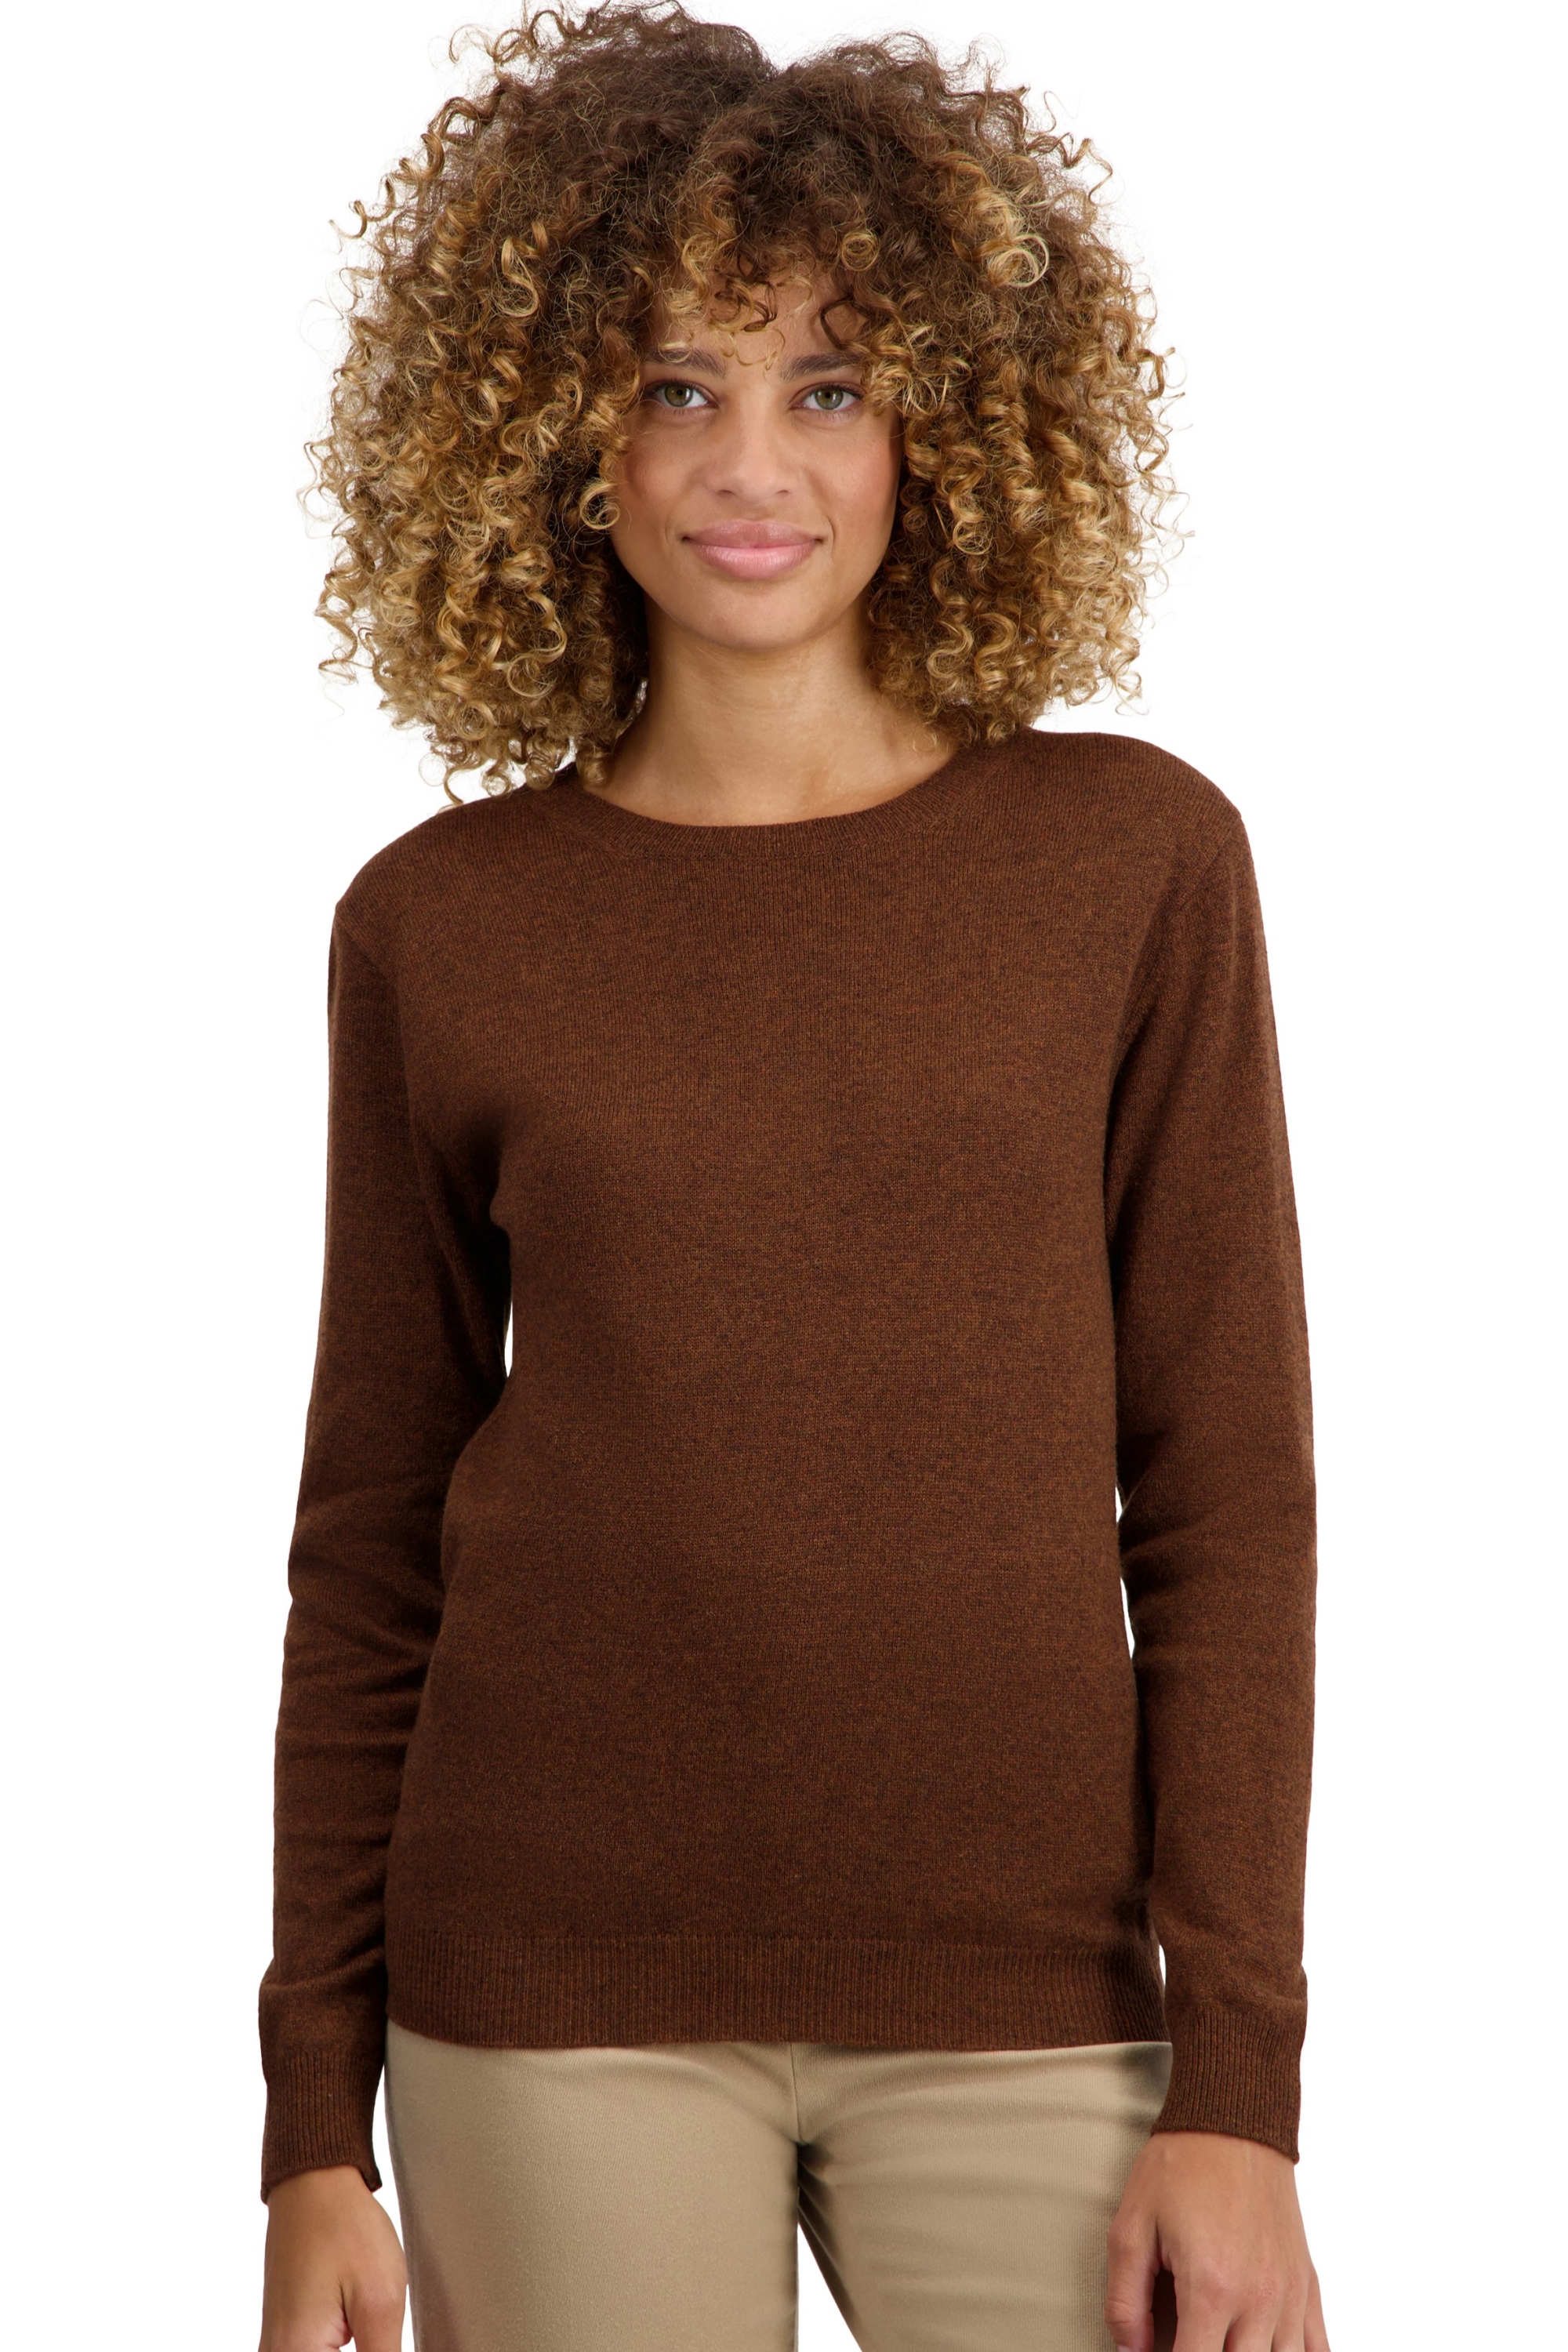 Cashmere ladies basic sweaters at low prices thalia first mace xl